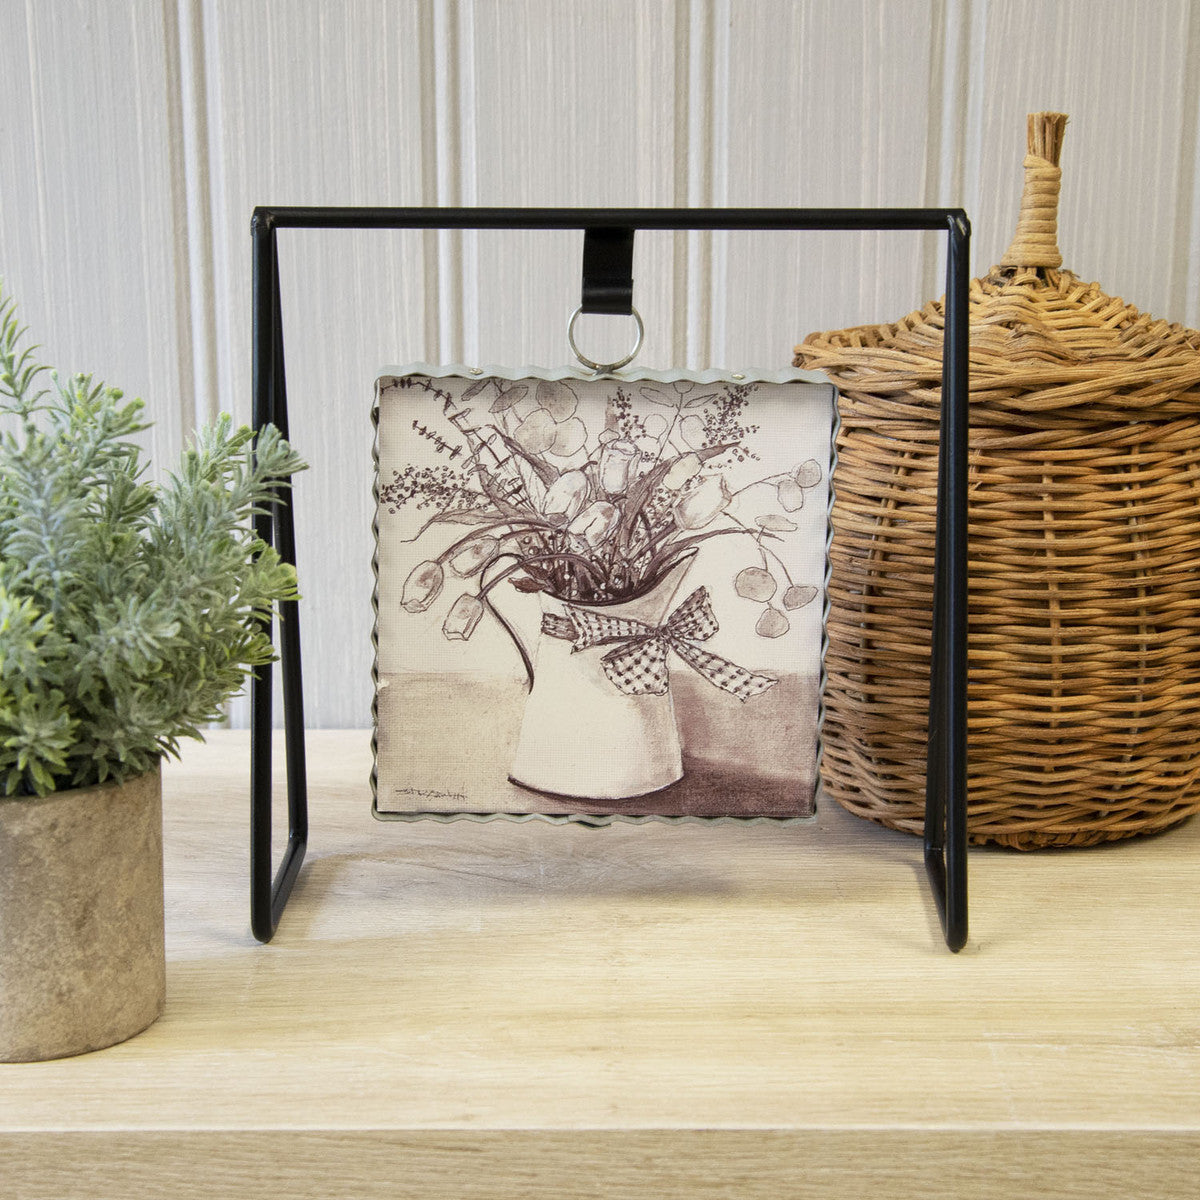 Display your prints and charms on our black Gallery Art Stand. This stand pairs wonderfully with our Gallery Wall Art and Charms.  Dimension 1: 9" x 3.5" x 9"